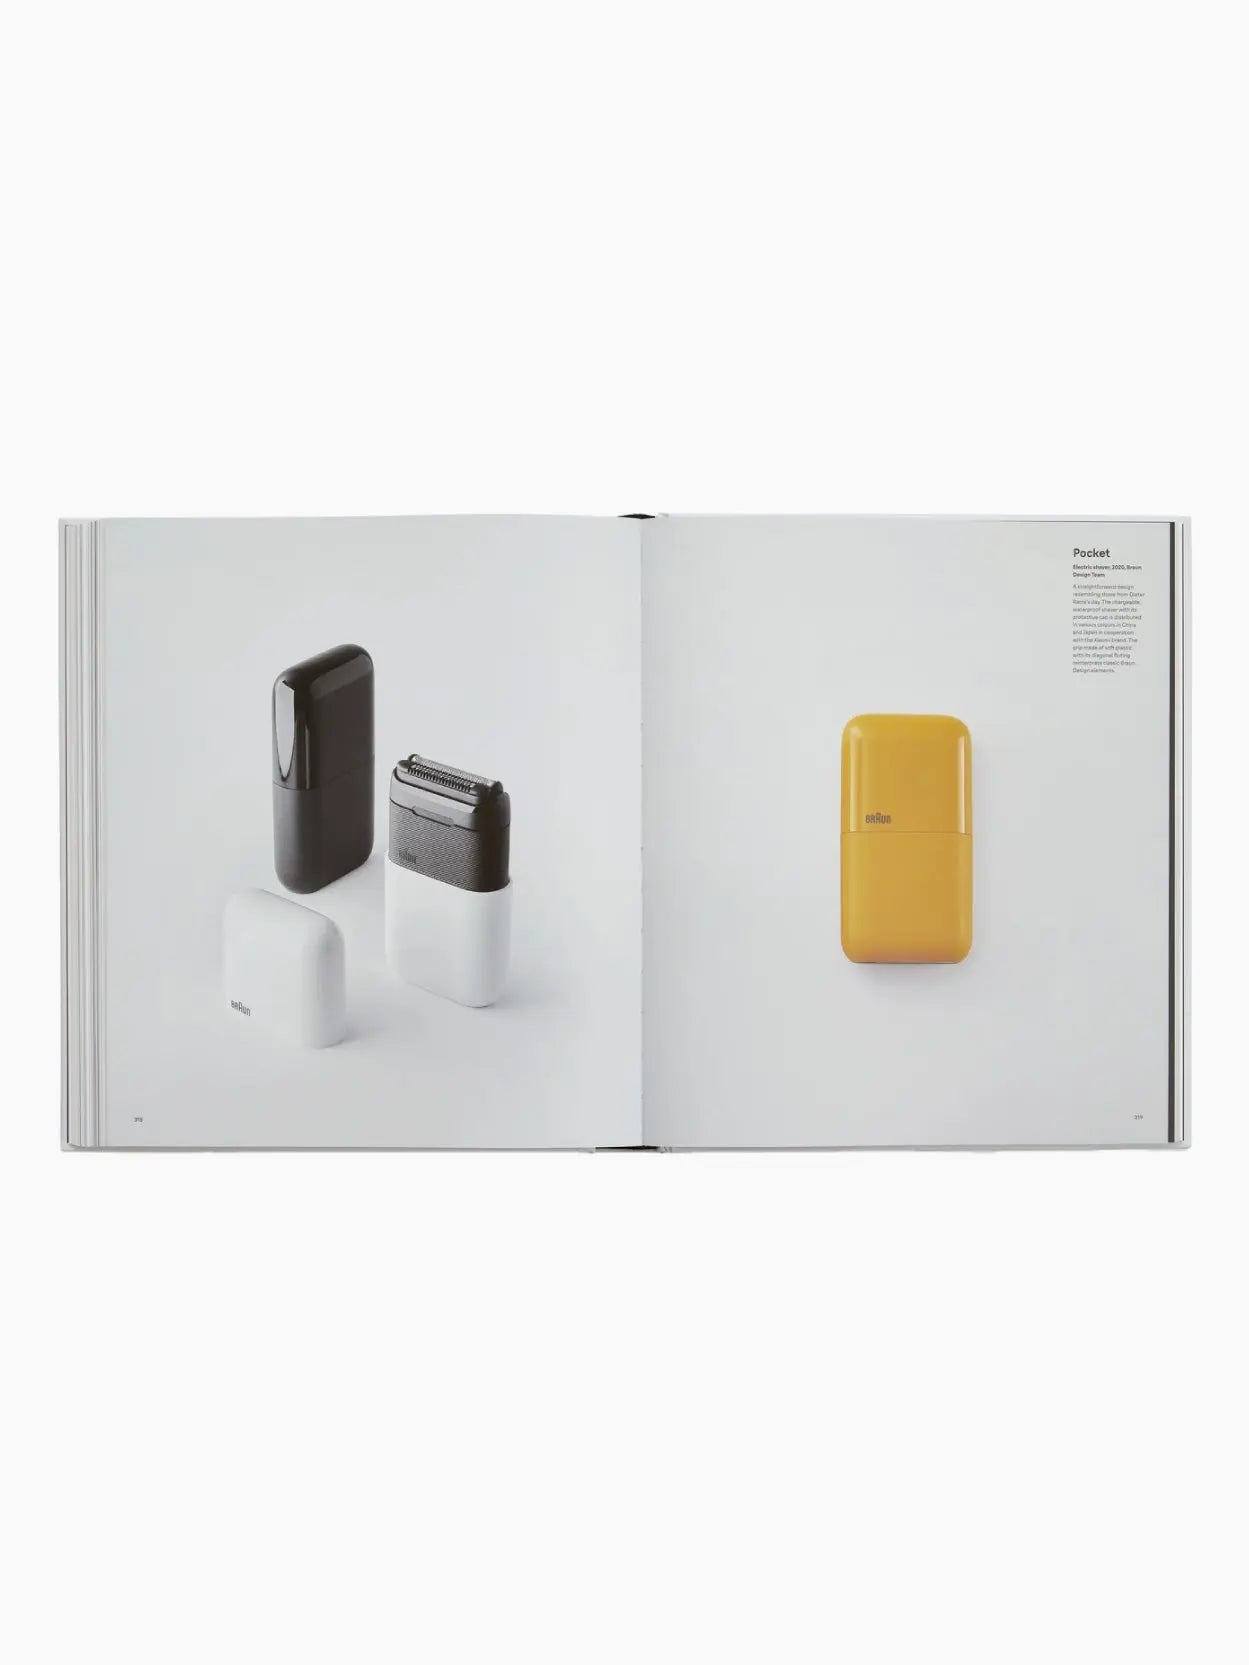 A white book with a black circular design on the cover, resembling a clock face with white hour and minute hands and a yellow second hand. The word "Braun" is written in white at the top of the black circle. Available at our Barcelona store or online at bassalstore, the spine reads "Phaidon: Braun: Designed to Keep.